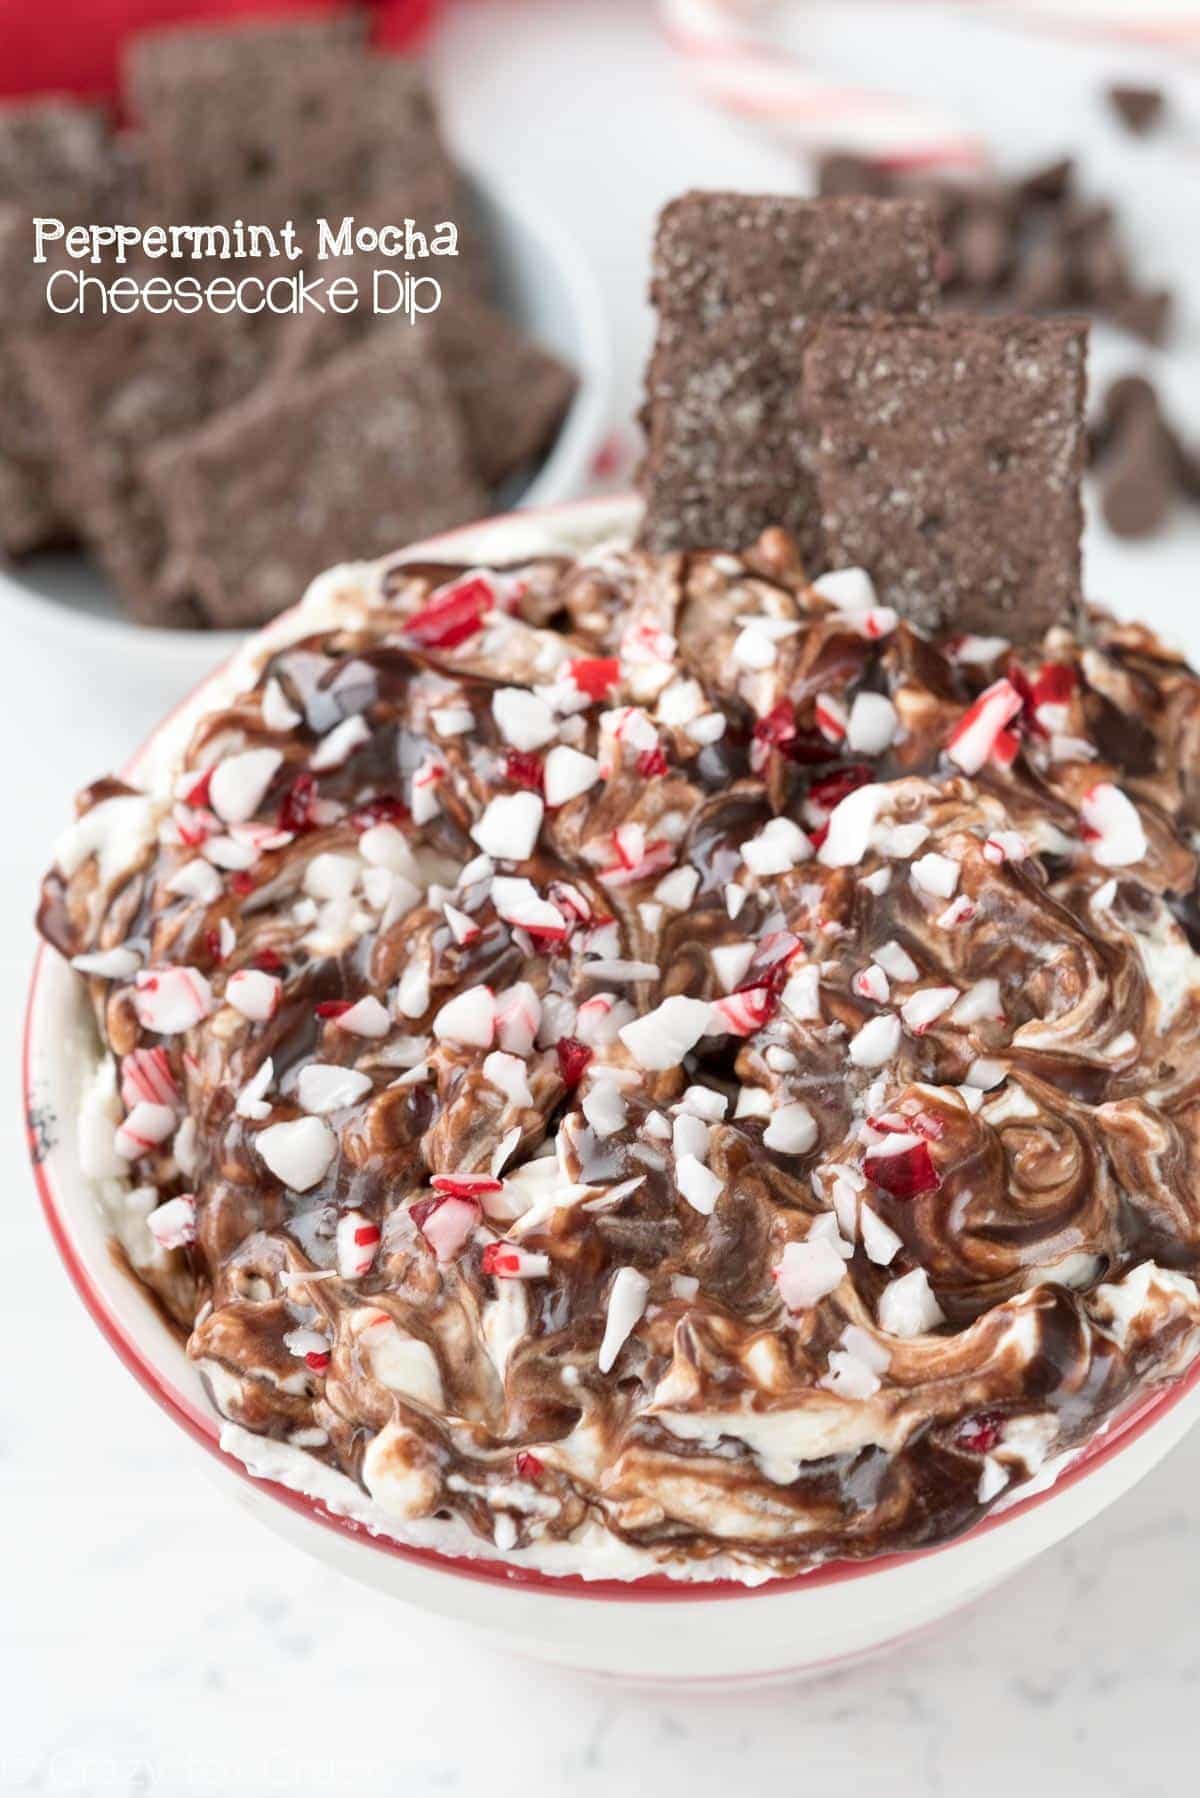 Peppermint Mocha Cheesecake Dip - this easy dip recipe is perfect for Christmas parties! I ate mine with a spoon, it was so good!